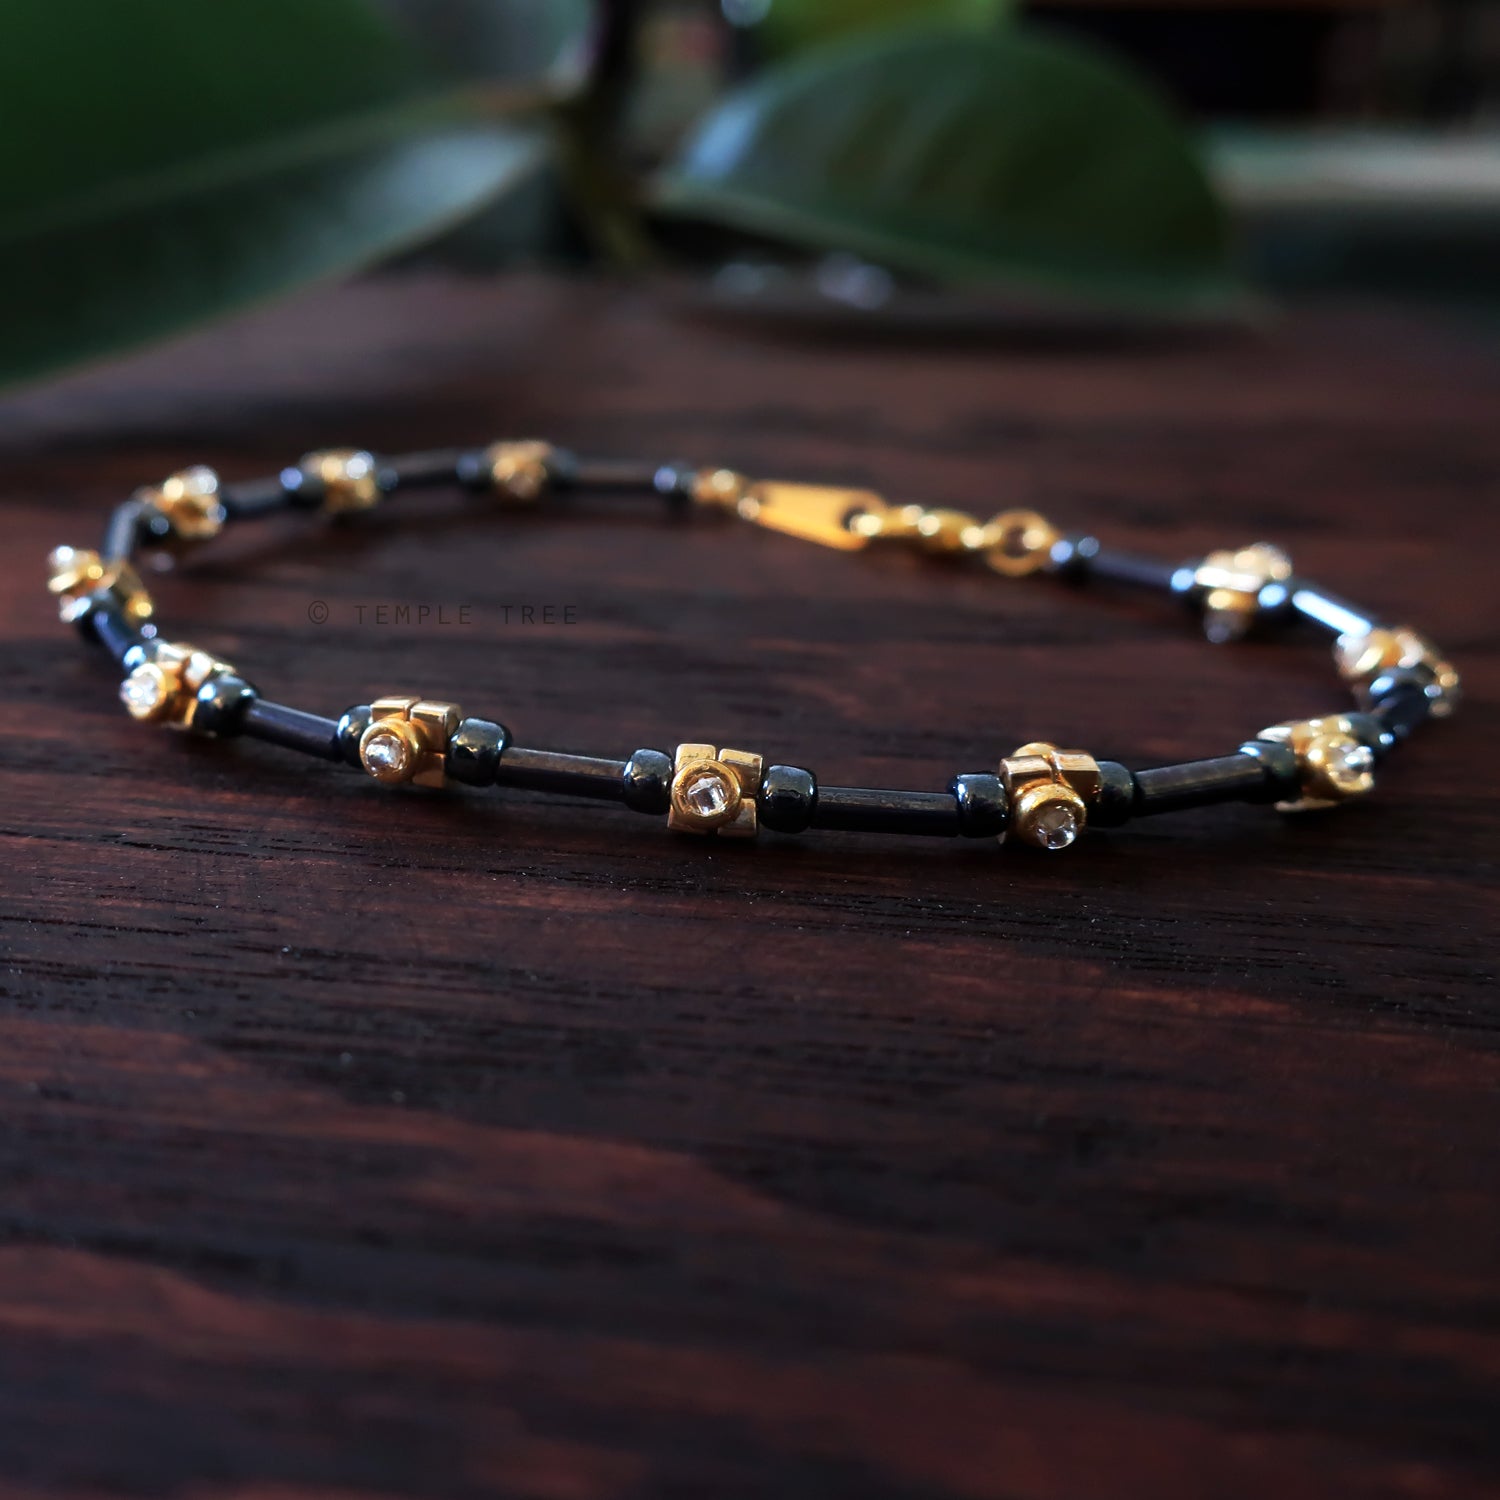 Temple Tree Lost Circuitry Beadwoven Bracelet v1 - Grey and Gold with Faux Diamond